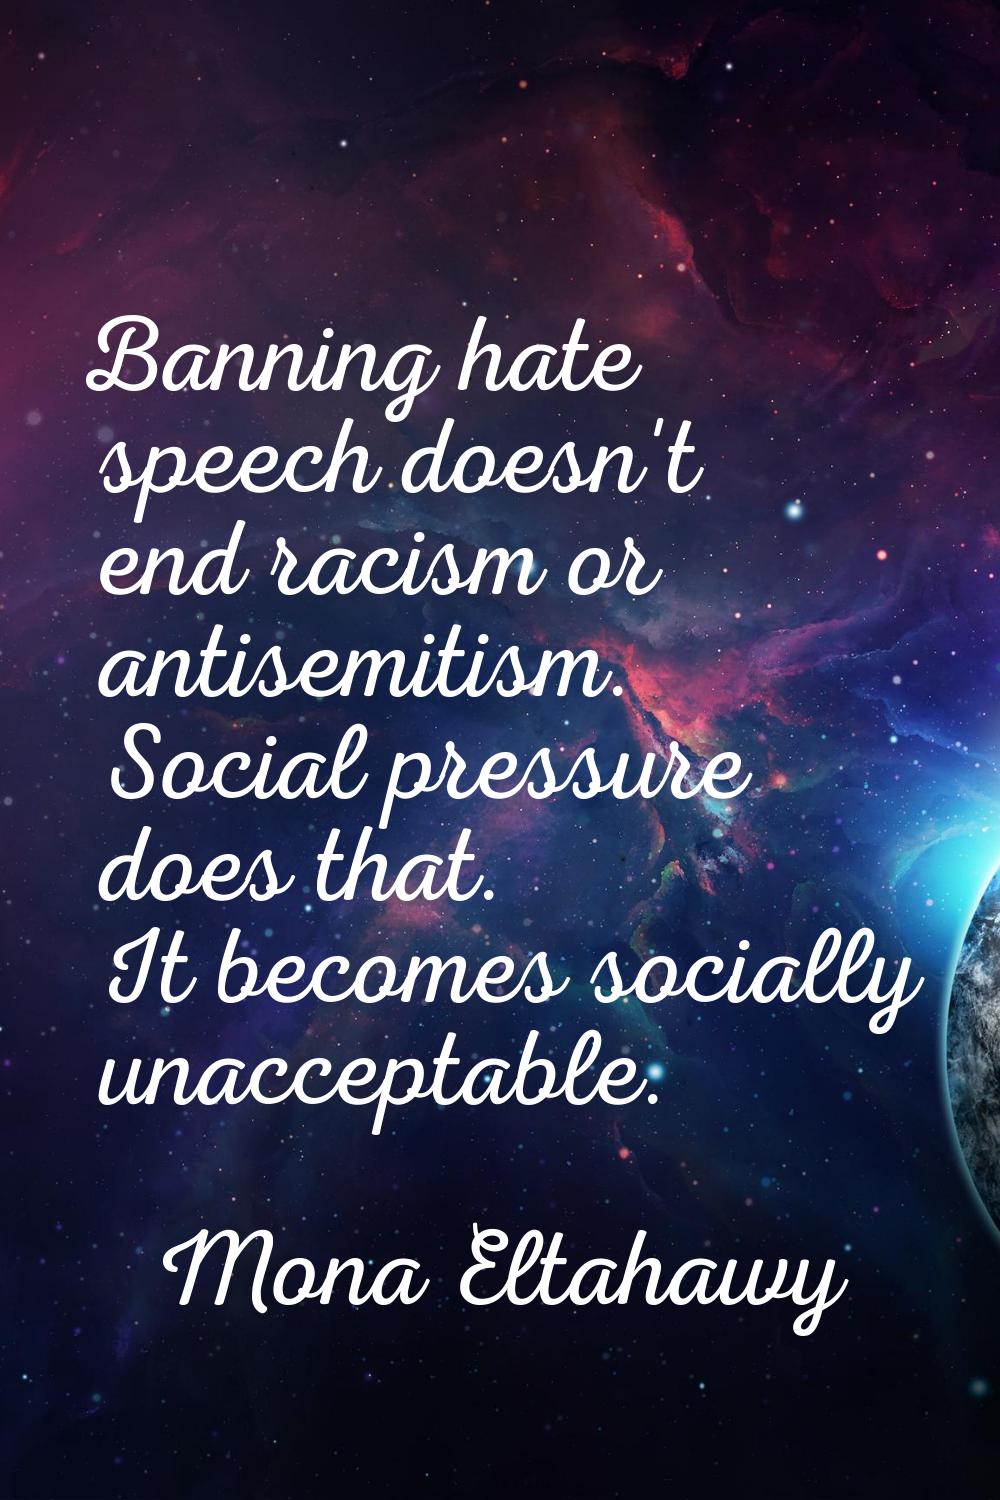 Banning hate speech doesn't end racism or antisemitism. Social pressure does that. It becomes socia